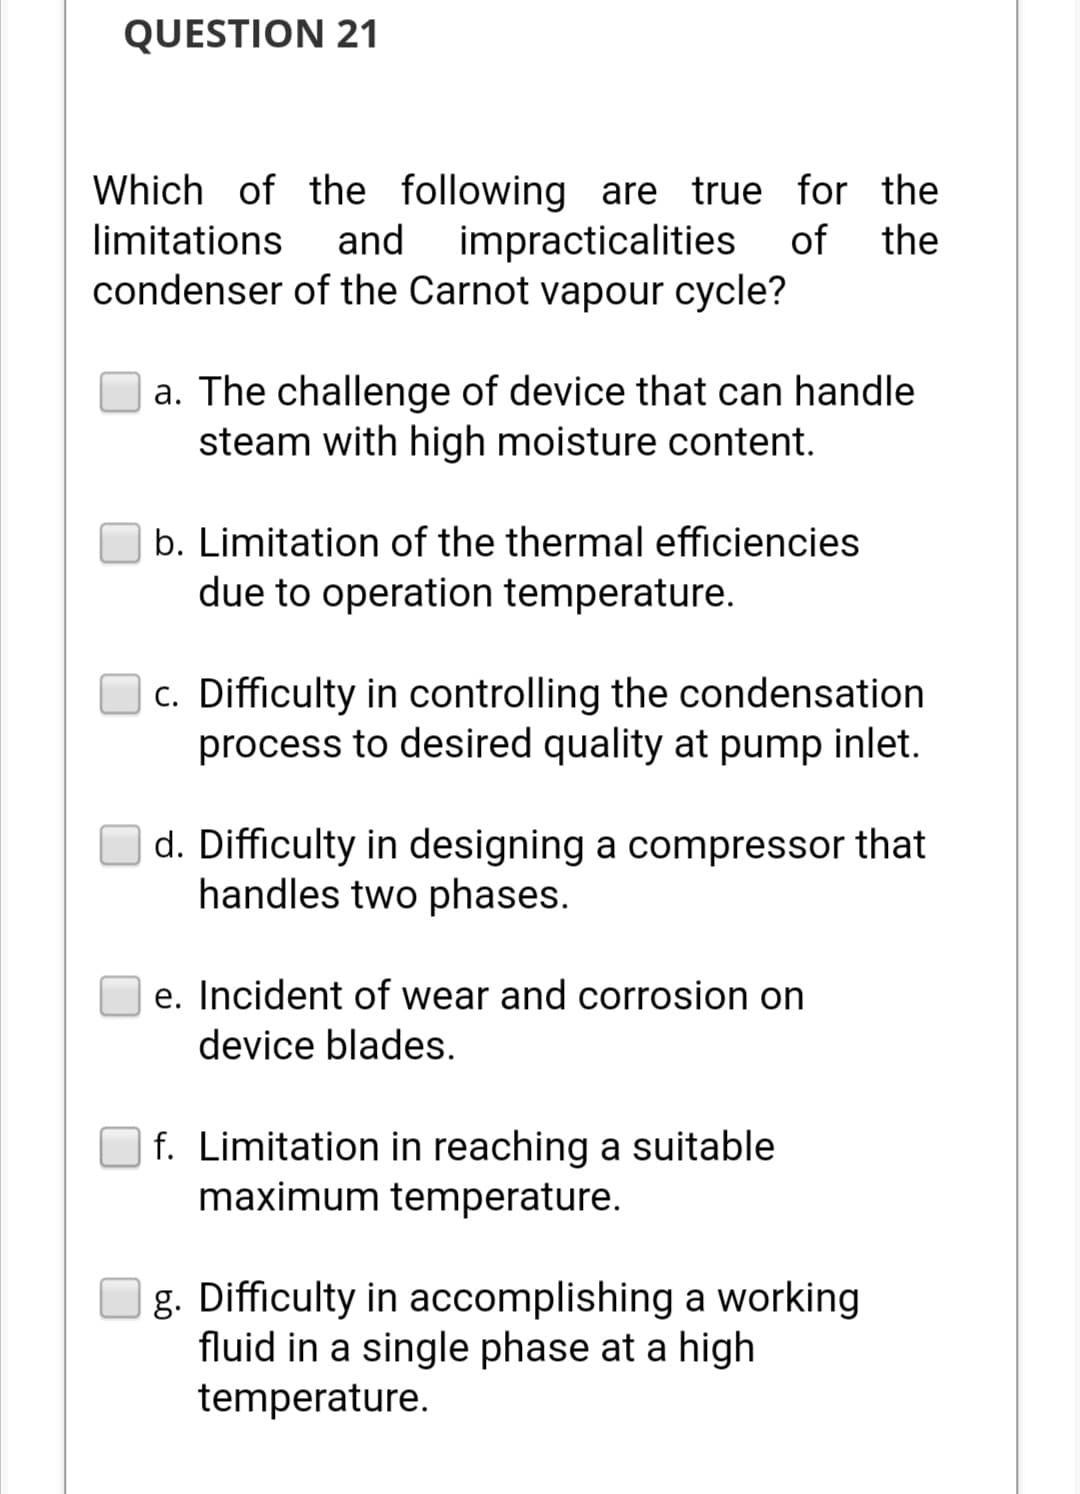 QUESTION 21
Which of the following are true for the
limitations and impracticalities of the
condenser of the Carnot vapour cycle?
a. The challenge of device that can handle
steam with high moisture content.
b. Limitation of the thermal efficiencies
due to operation temperature.
c. Difficulty in controlling the condensation
process to desired quality at pump inlet.
d. Difficulty in designing a compressor that
handles two phases.
e. Incident of wear and corrosion on
device blades.
f. Limitation in reaching a suitable
maximum temperature.
g. Difficulty in accomplishing a working
fluid in a single phase at a high
temperature.